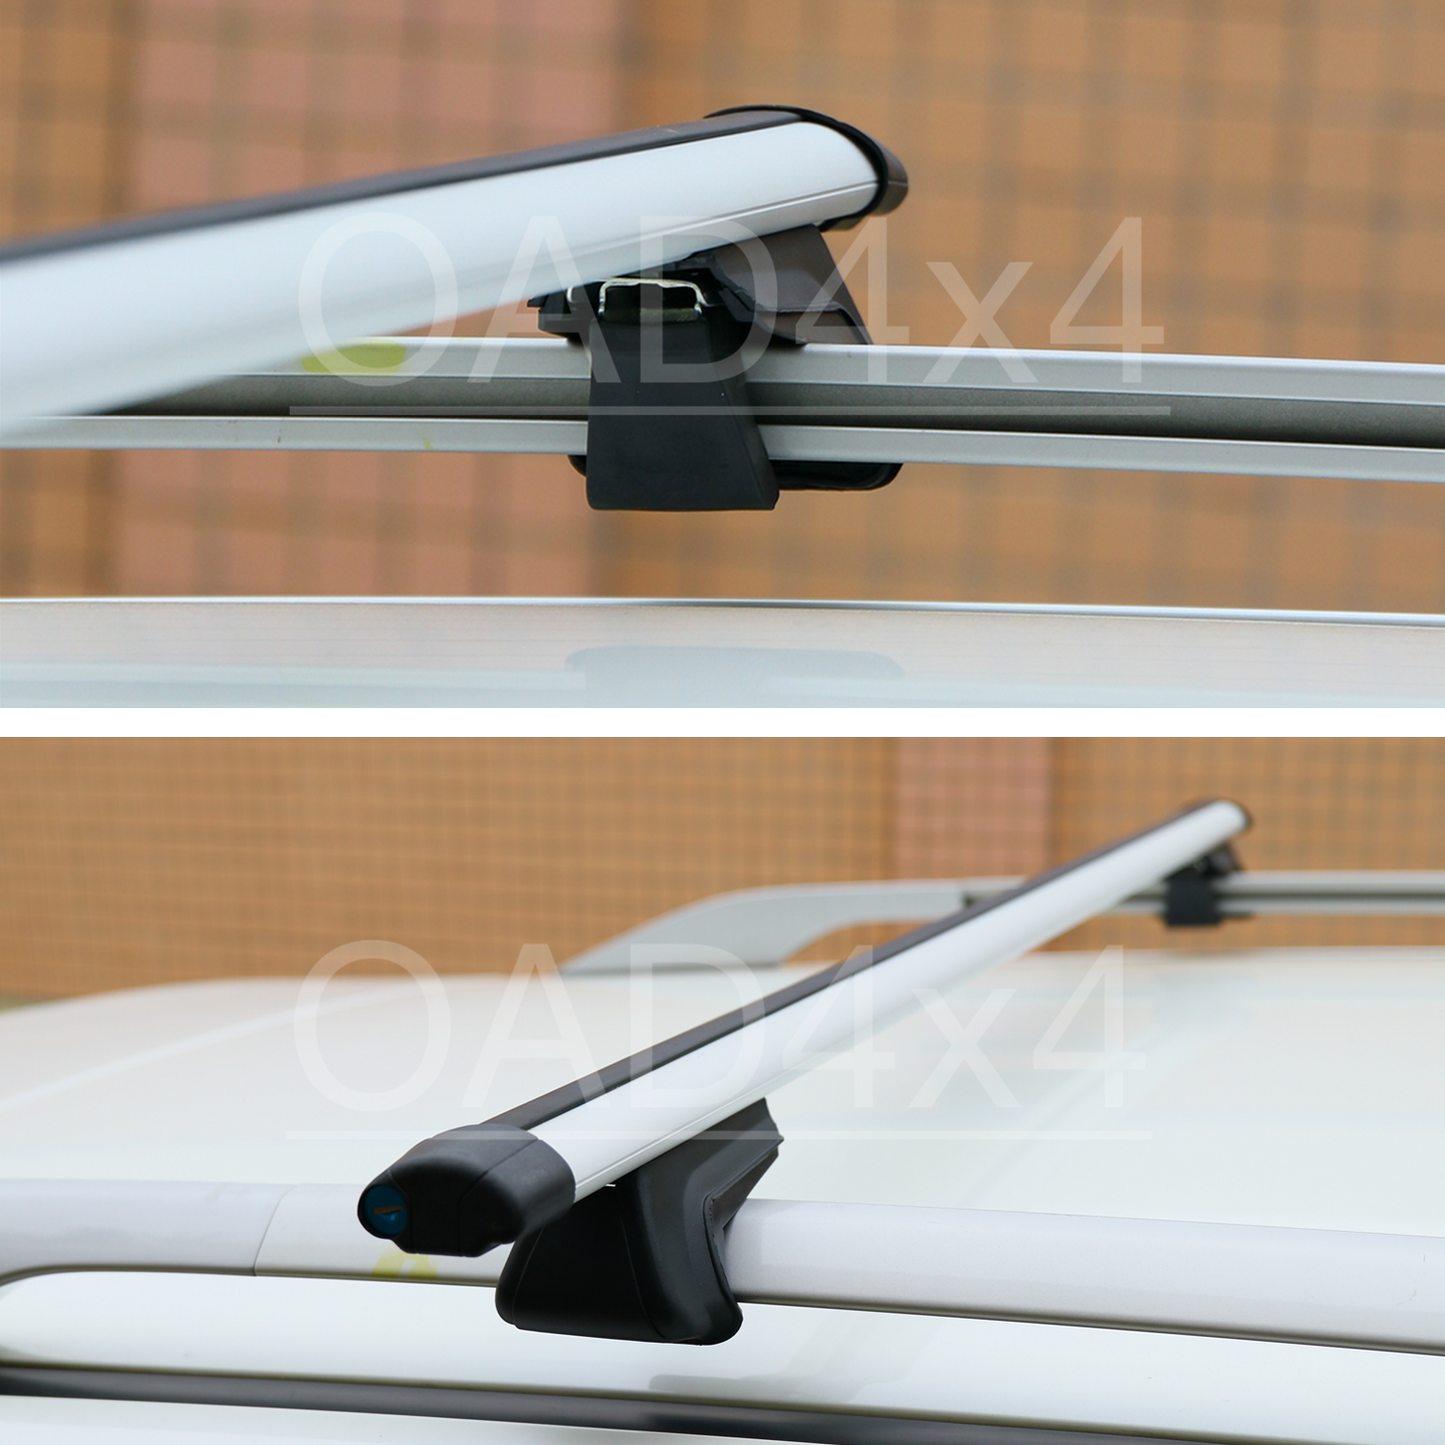 1 Pair Aluminum Silver Cross Bar Roof Racks Baggage holder for Suzuki SX4 hatch 5D 07-15 with raised roof rail